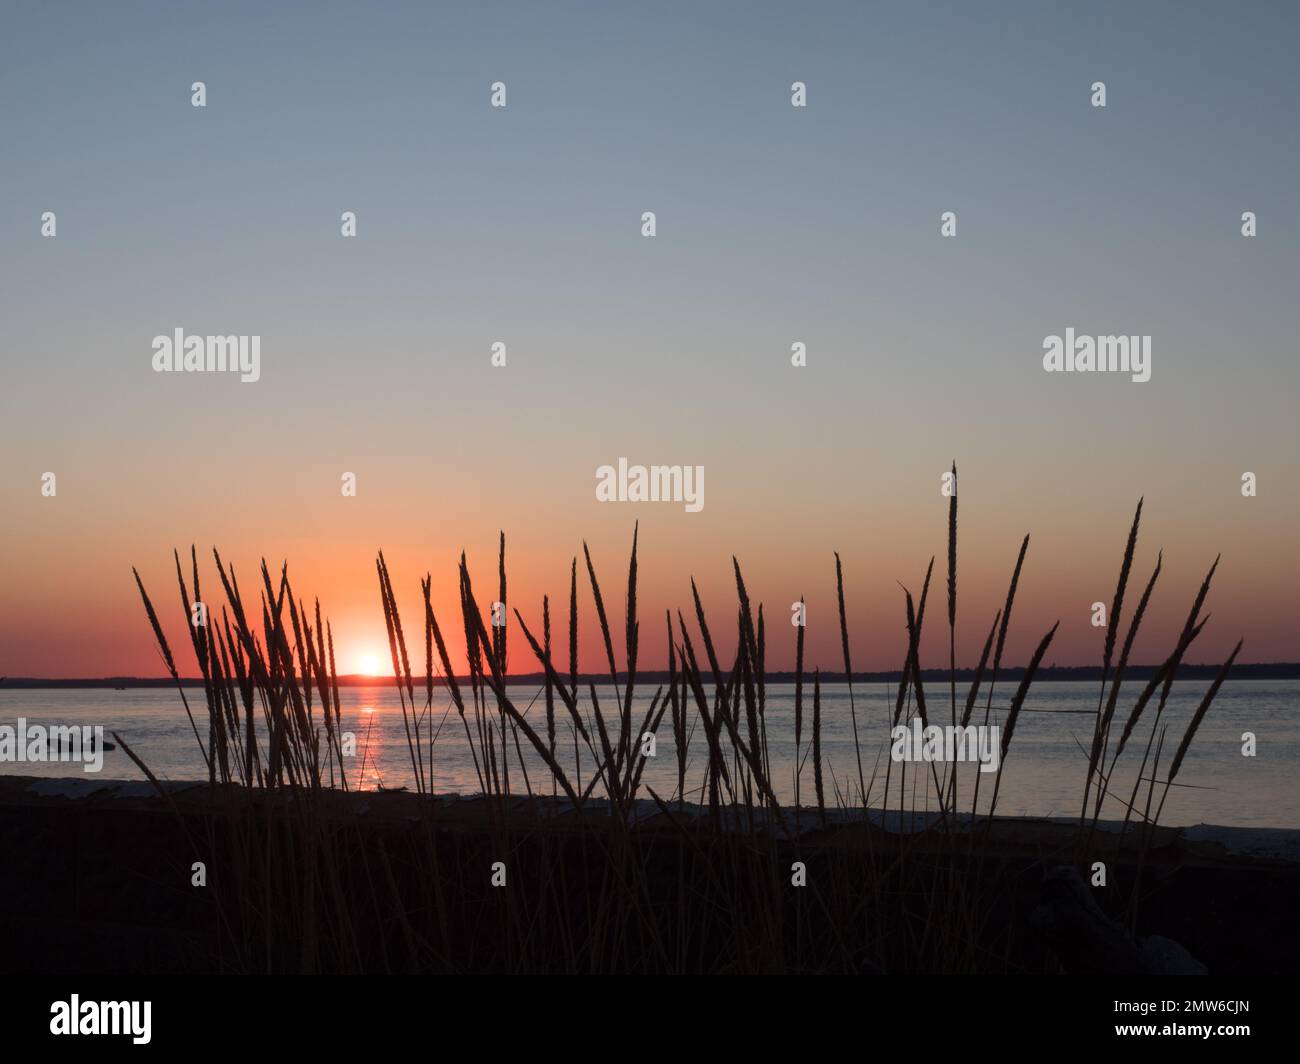 Reed reeds grass silhouette foreground backlit countre jour by low sunset over Solent sea water mainland outline background Stock Photo